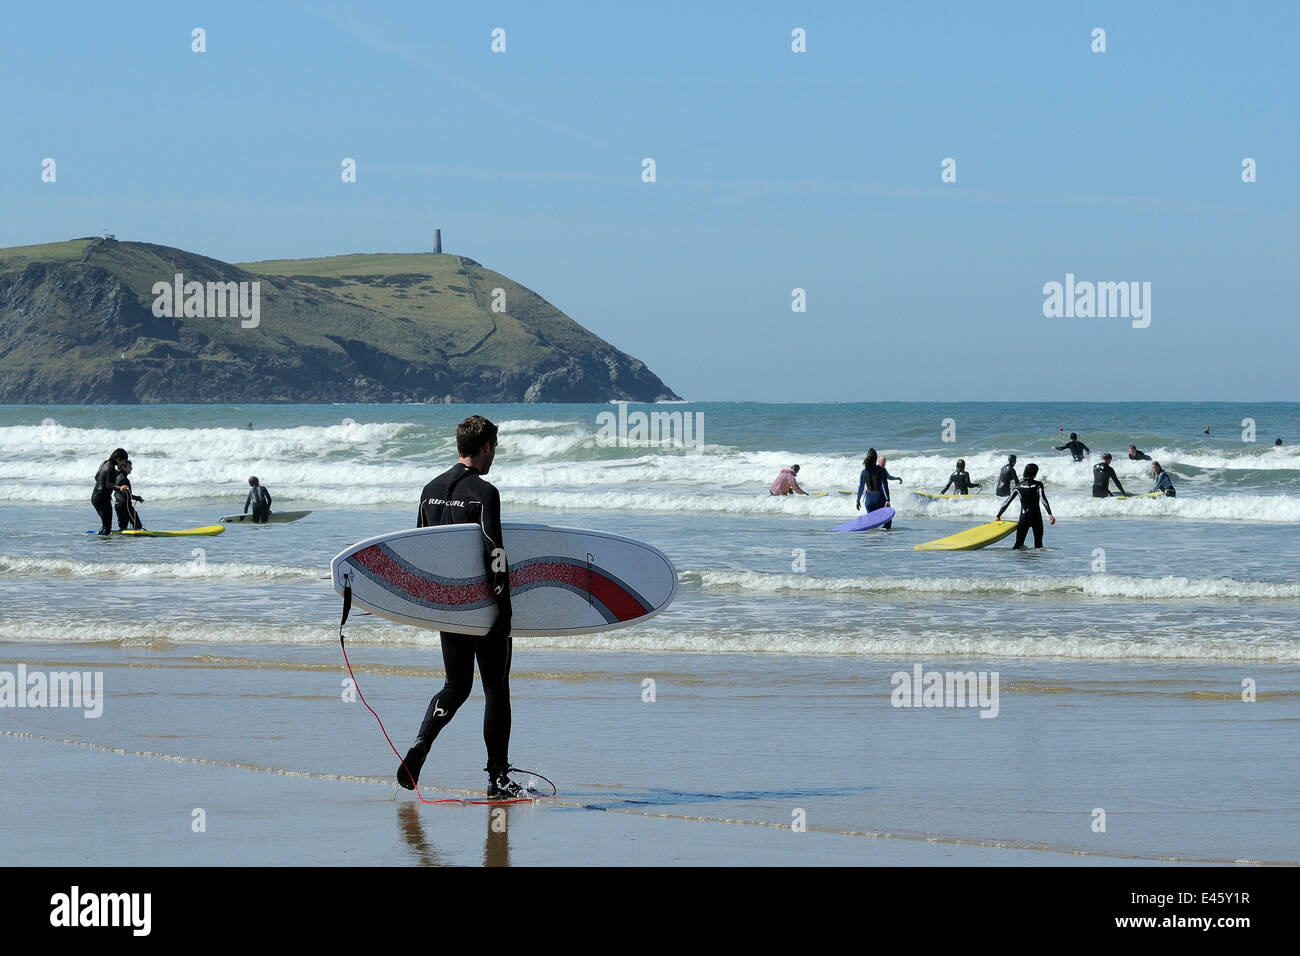 Surfers heading out into the waves at Polzeath beach. Cornwall, UK, April 2010. Stock Photo